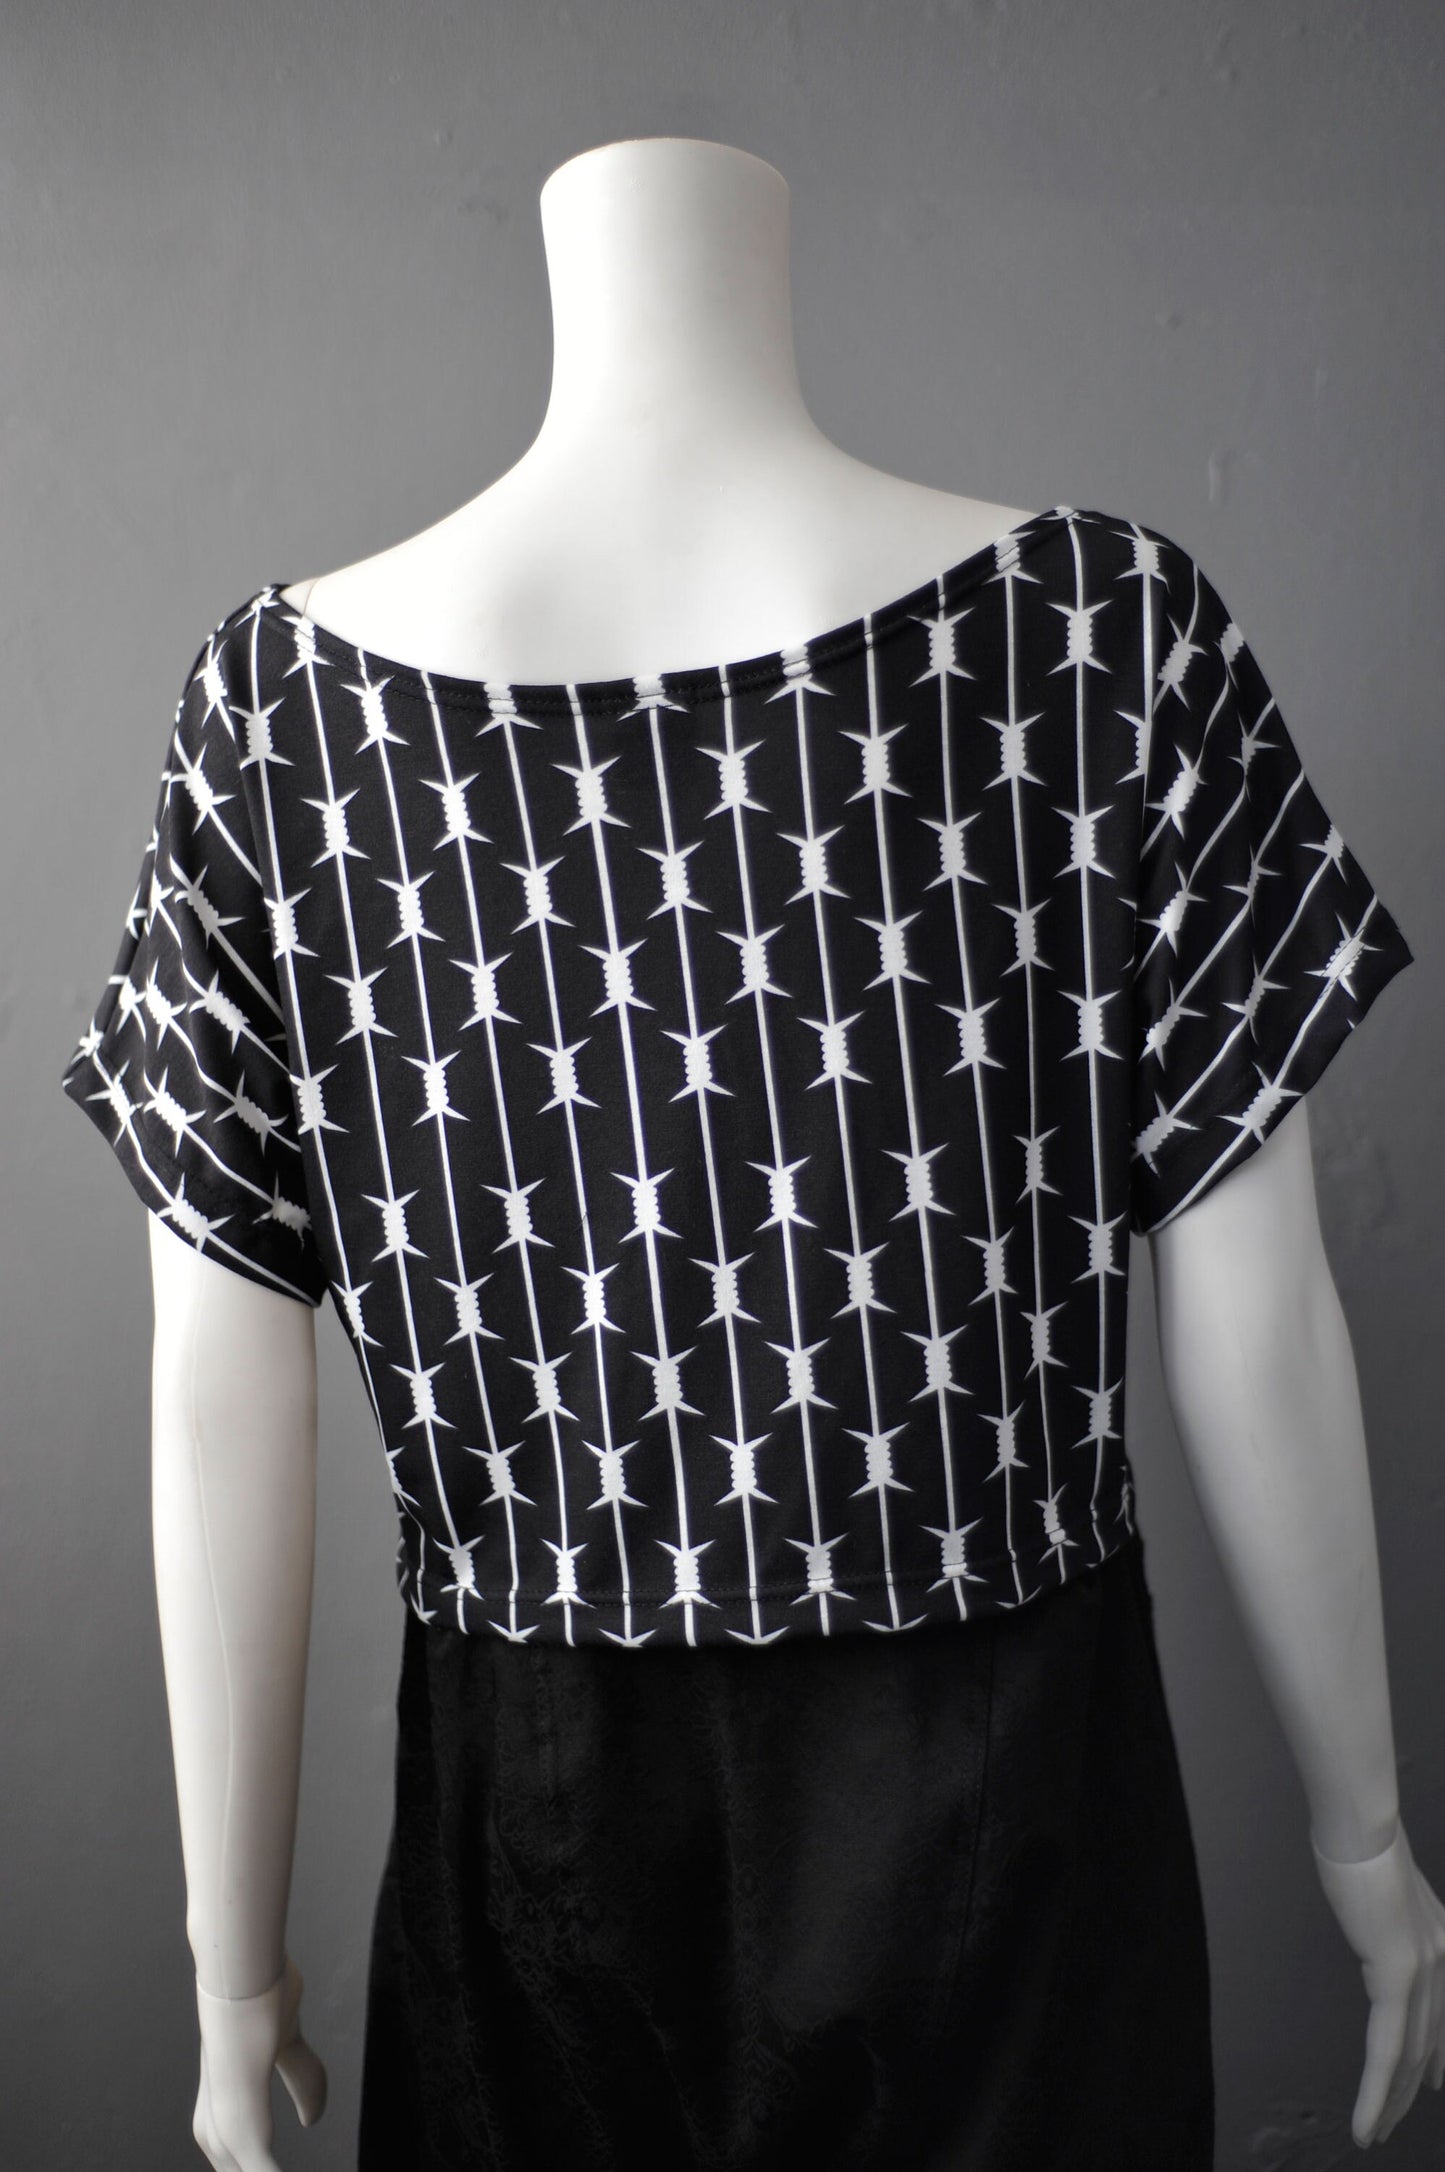 Oversized Crop Top with Barbed Wire Print, Unisex Gothic Tshirt